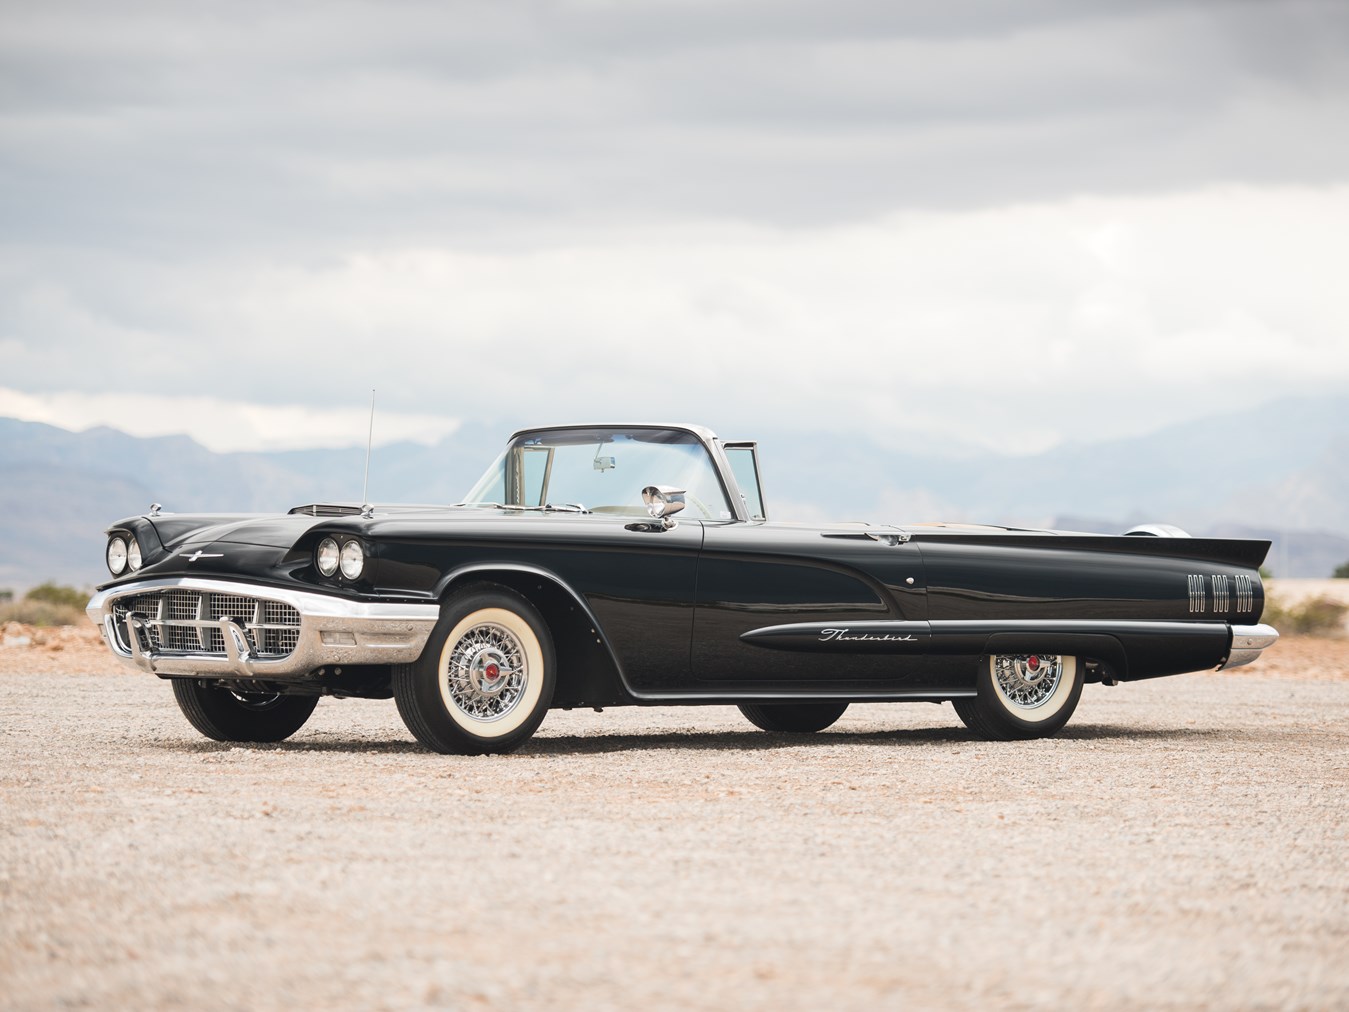 The 1958-1960 Ford Thunderbird became a style icon equally at home both in the United States and in such places as Monte Carlo.